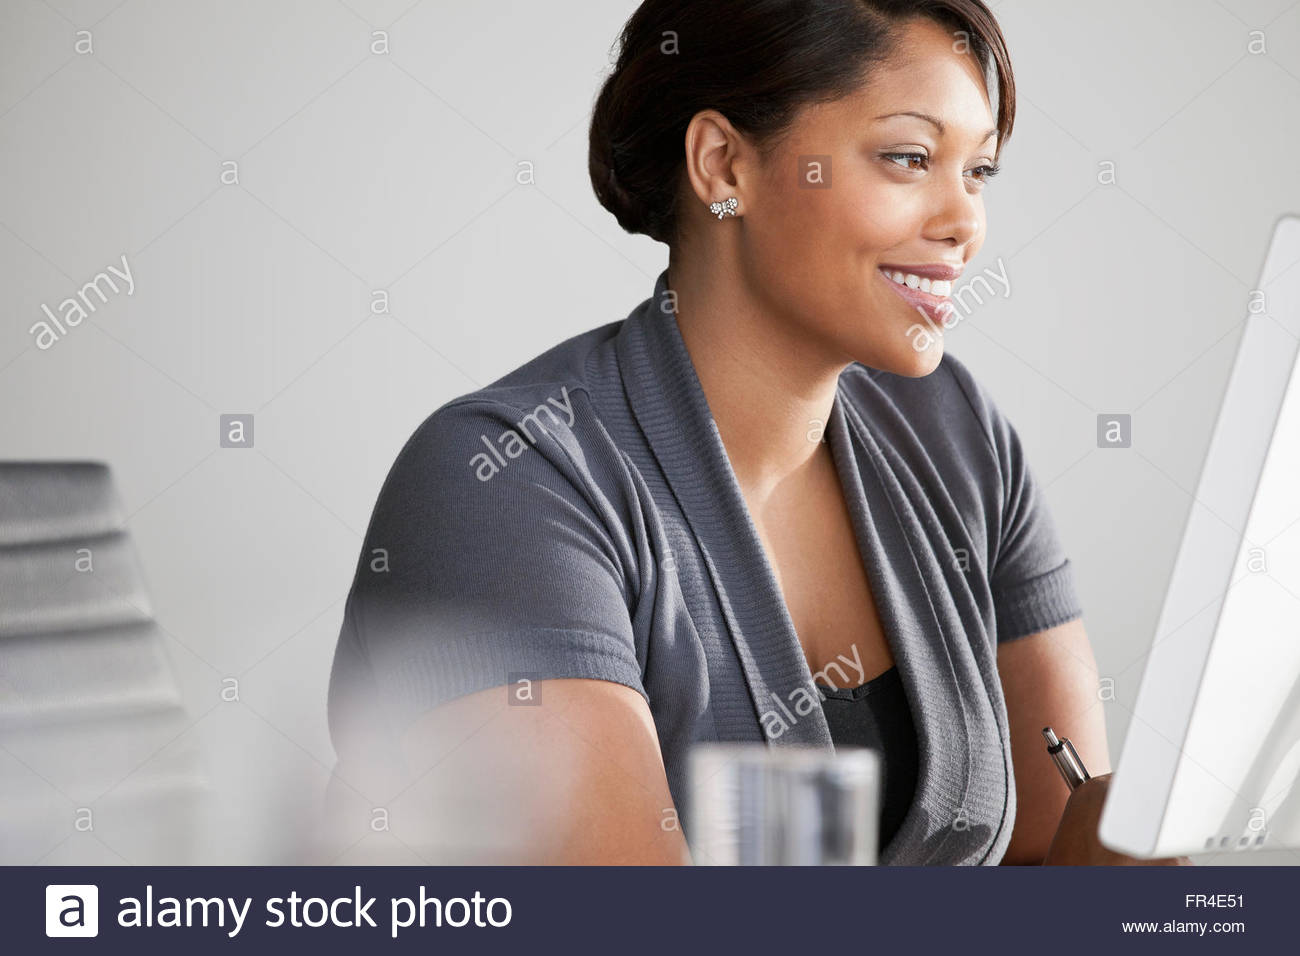 pretty, young, black business woman Stock Photo